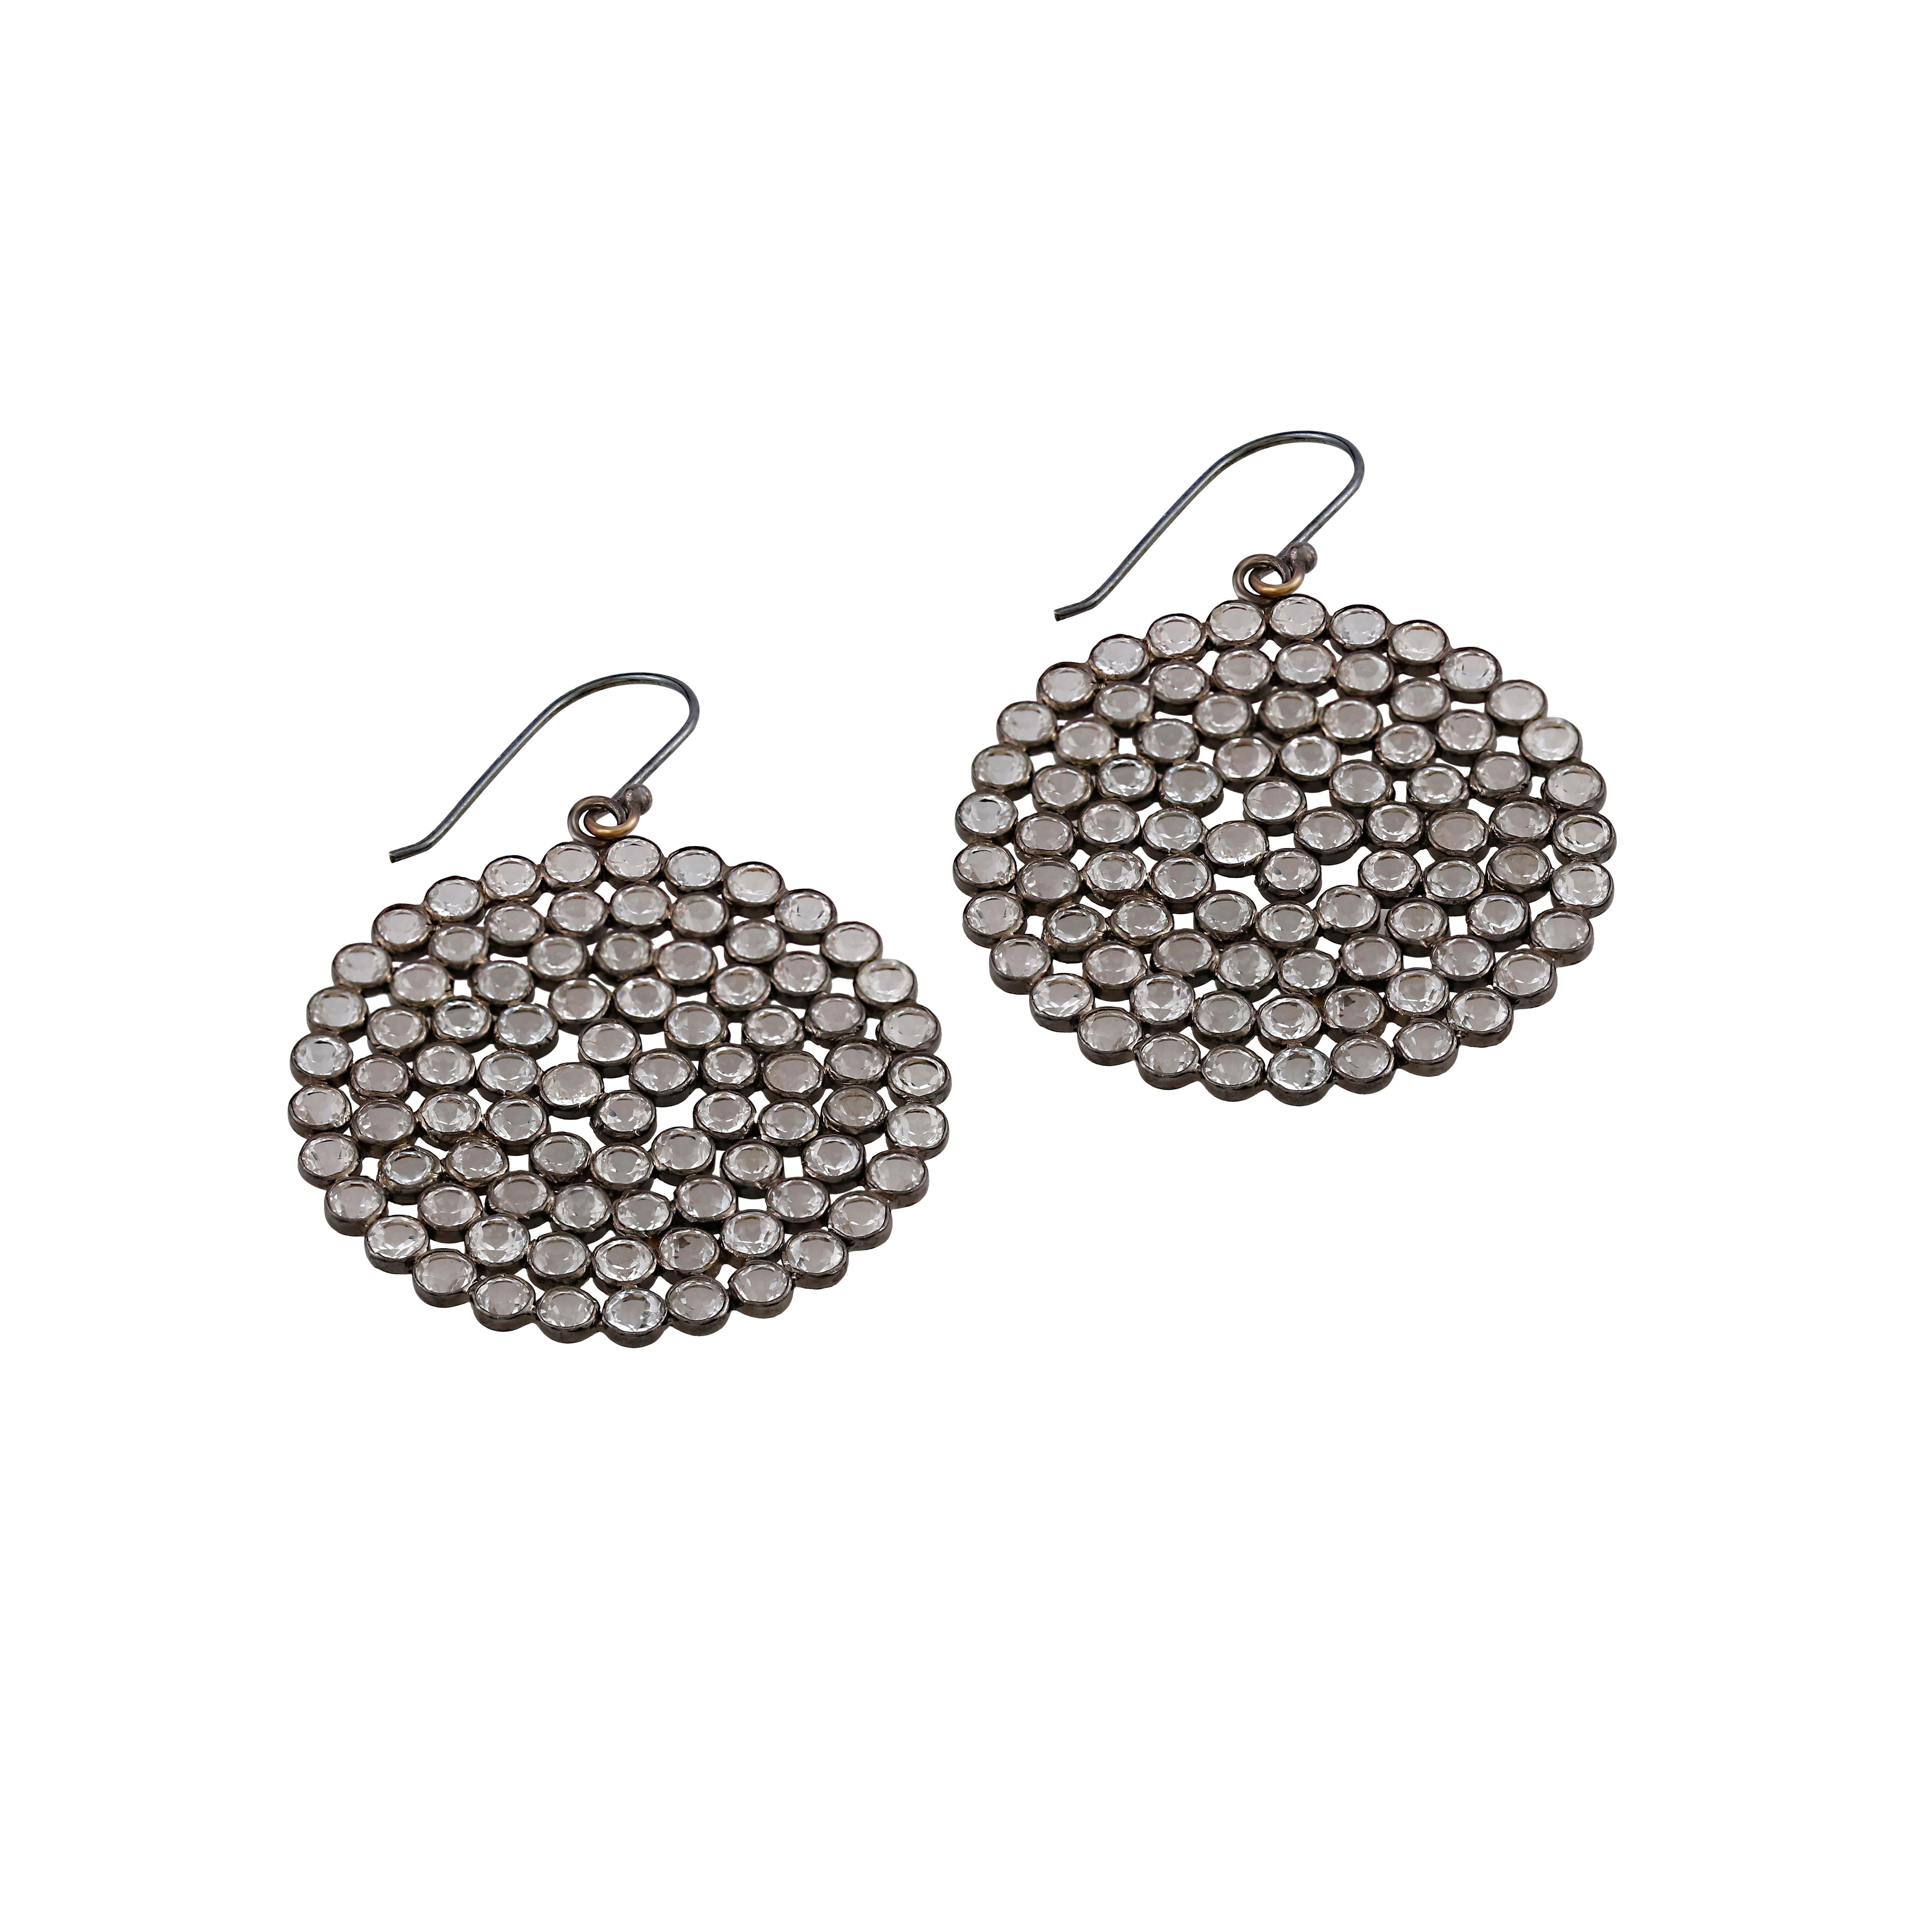 You will enjoy the glistening colors of these sterling silver drop earrings that Gemistry made! Brilliant white topazes suspended on lever backs are featured in the traditional circular shape. For an exquisite coordinated look, pair these with a